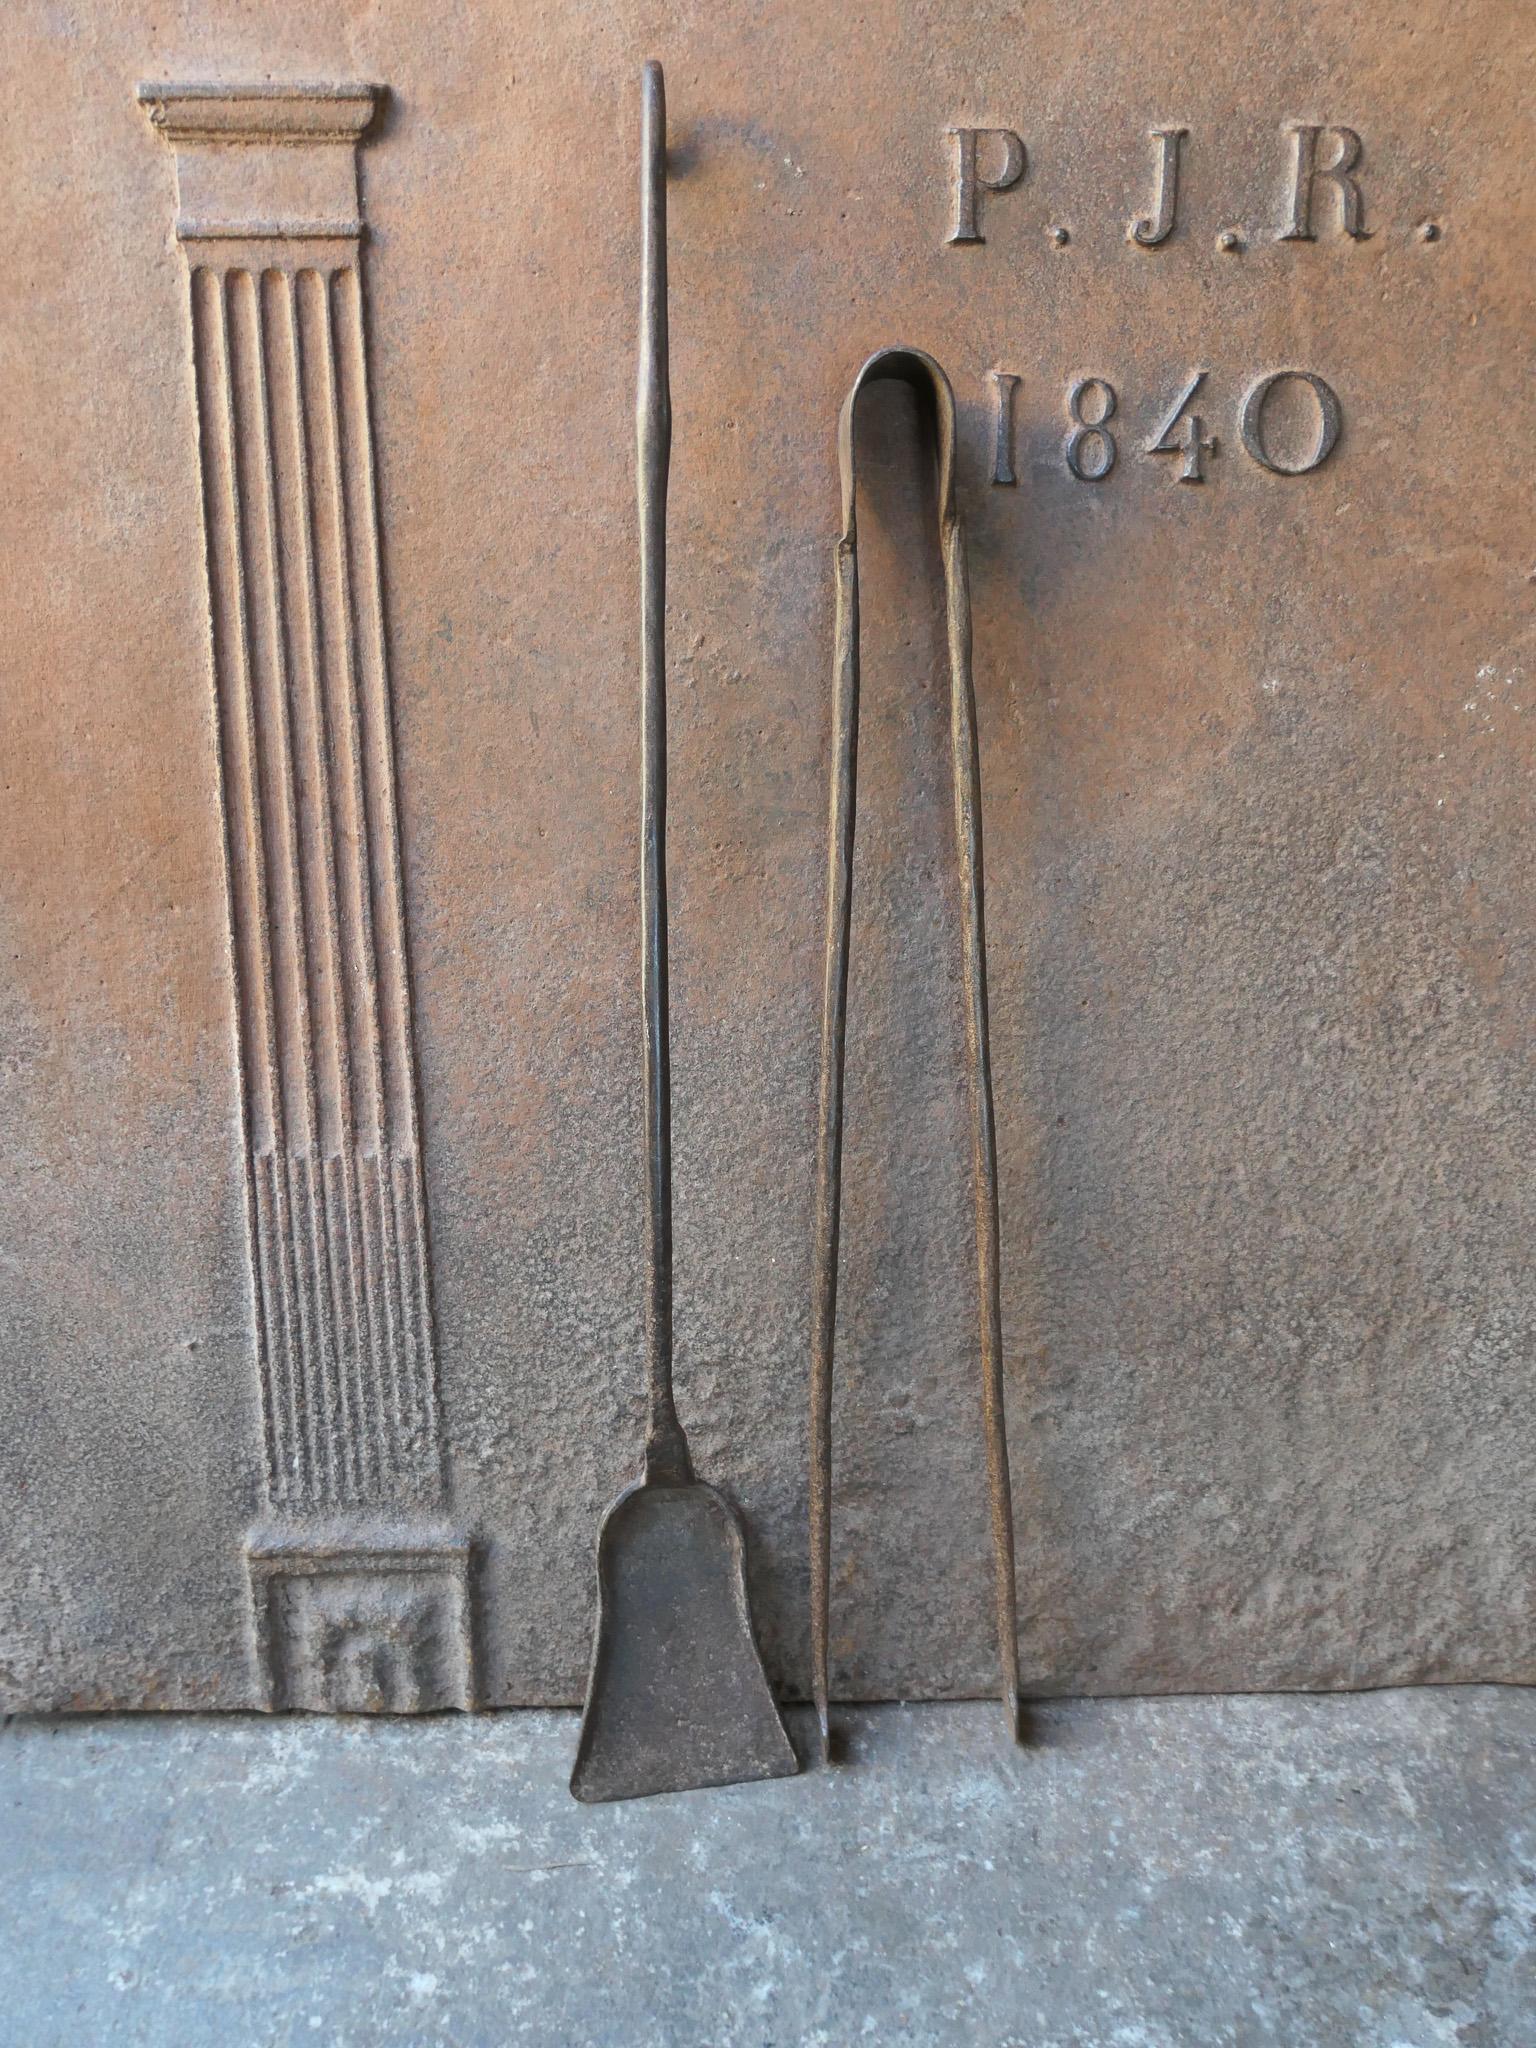 Rustic 18th century French fireplace tool set. The tool set consists of fireplace tongs and a shovel. The tools are made of wrought iron. The set is in a good condition and fit for use in the fireplace.